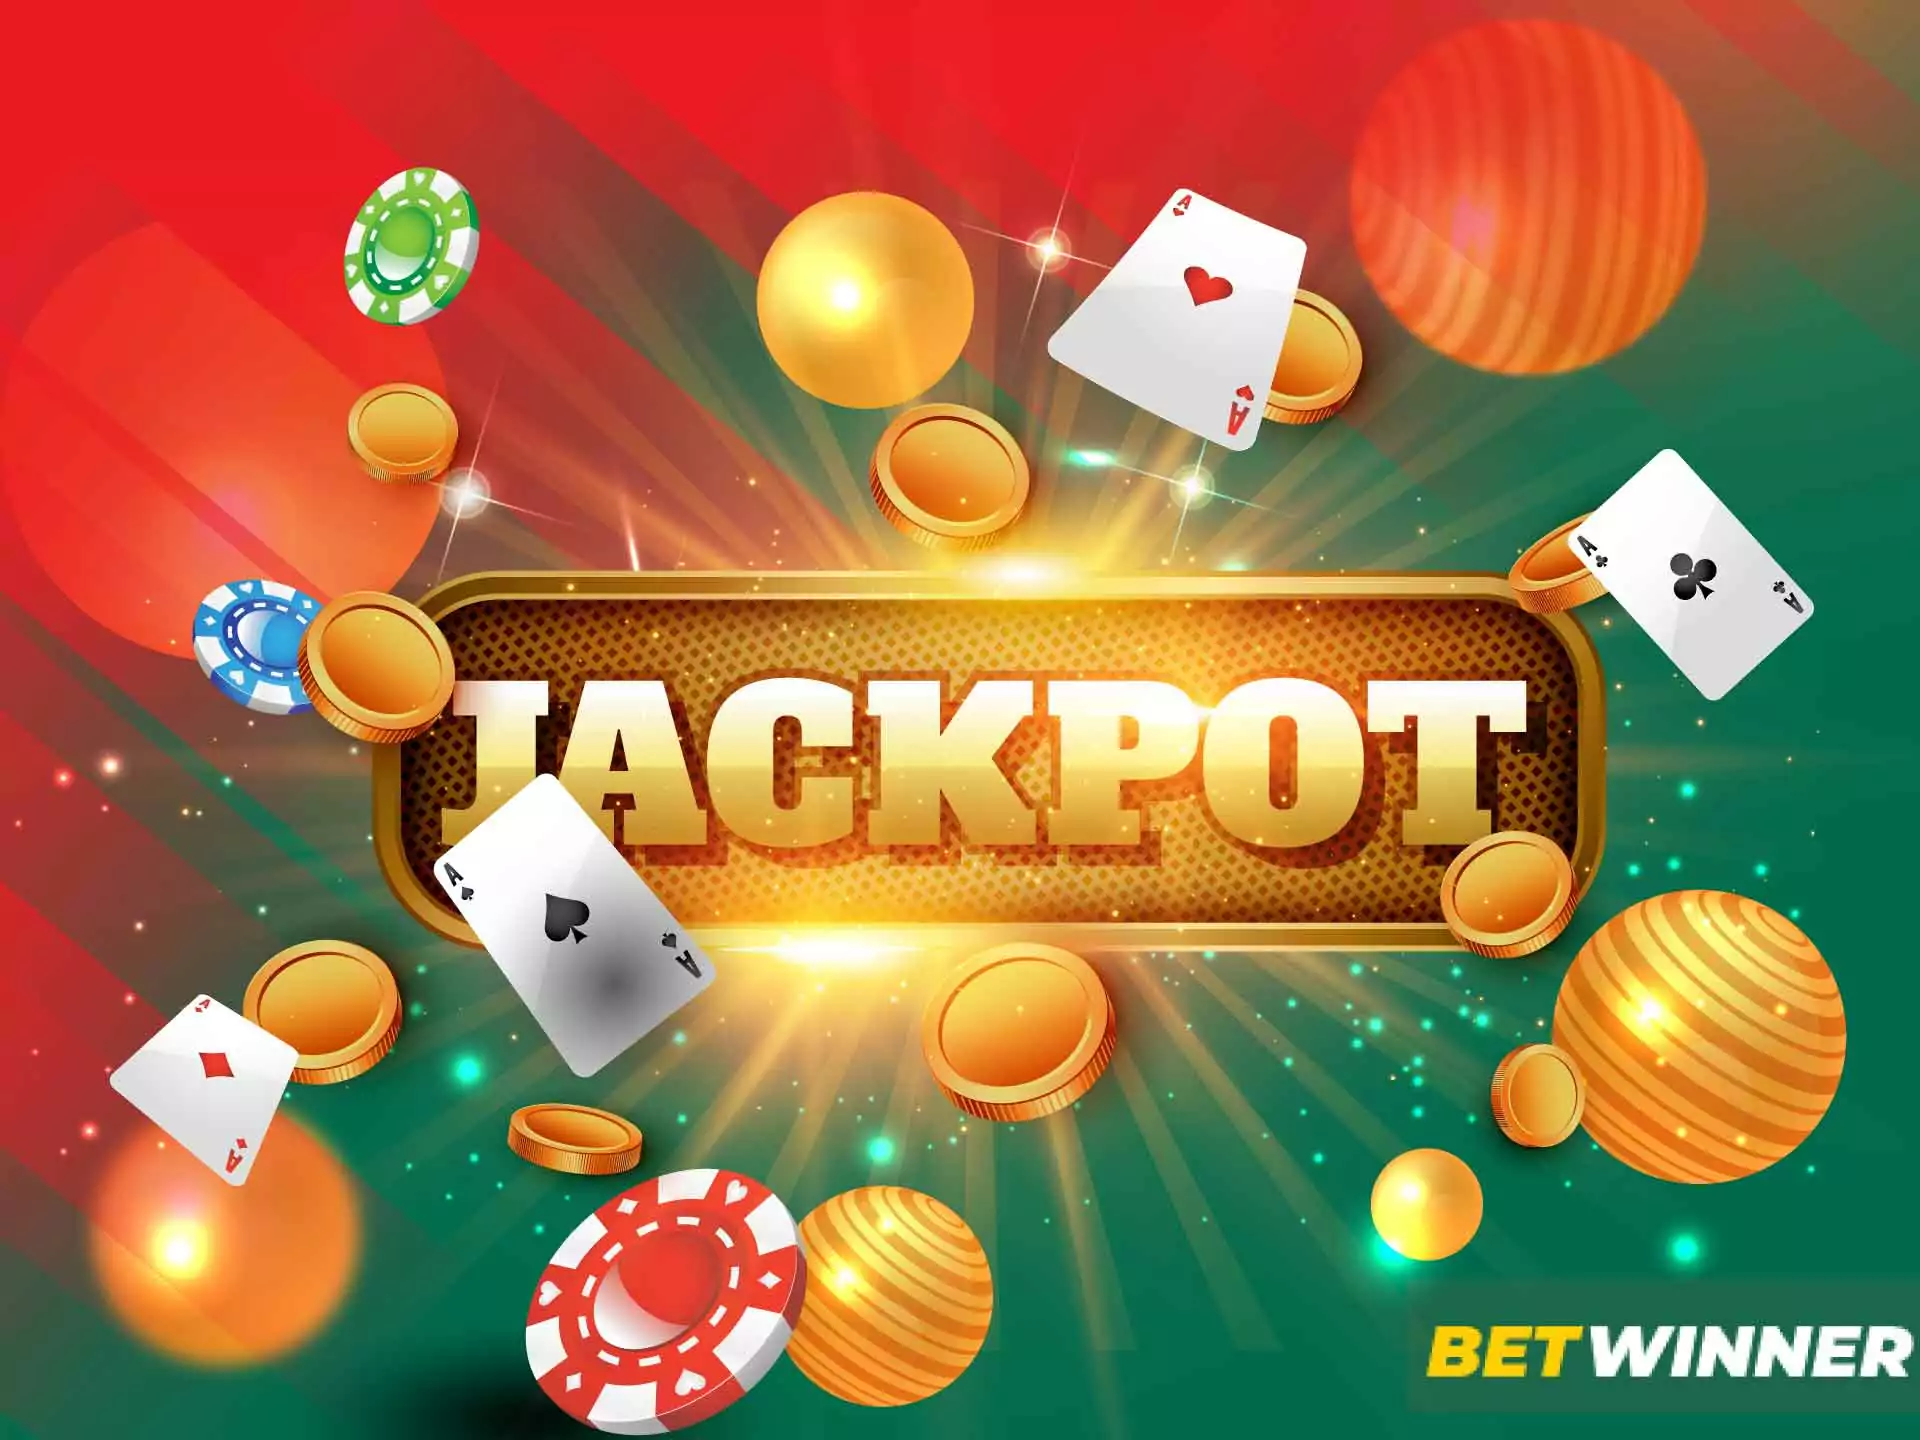 Try to win a big jackpot in the specific games.